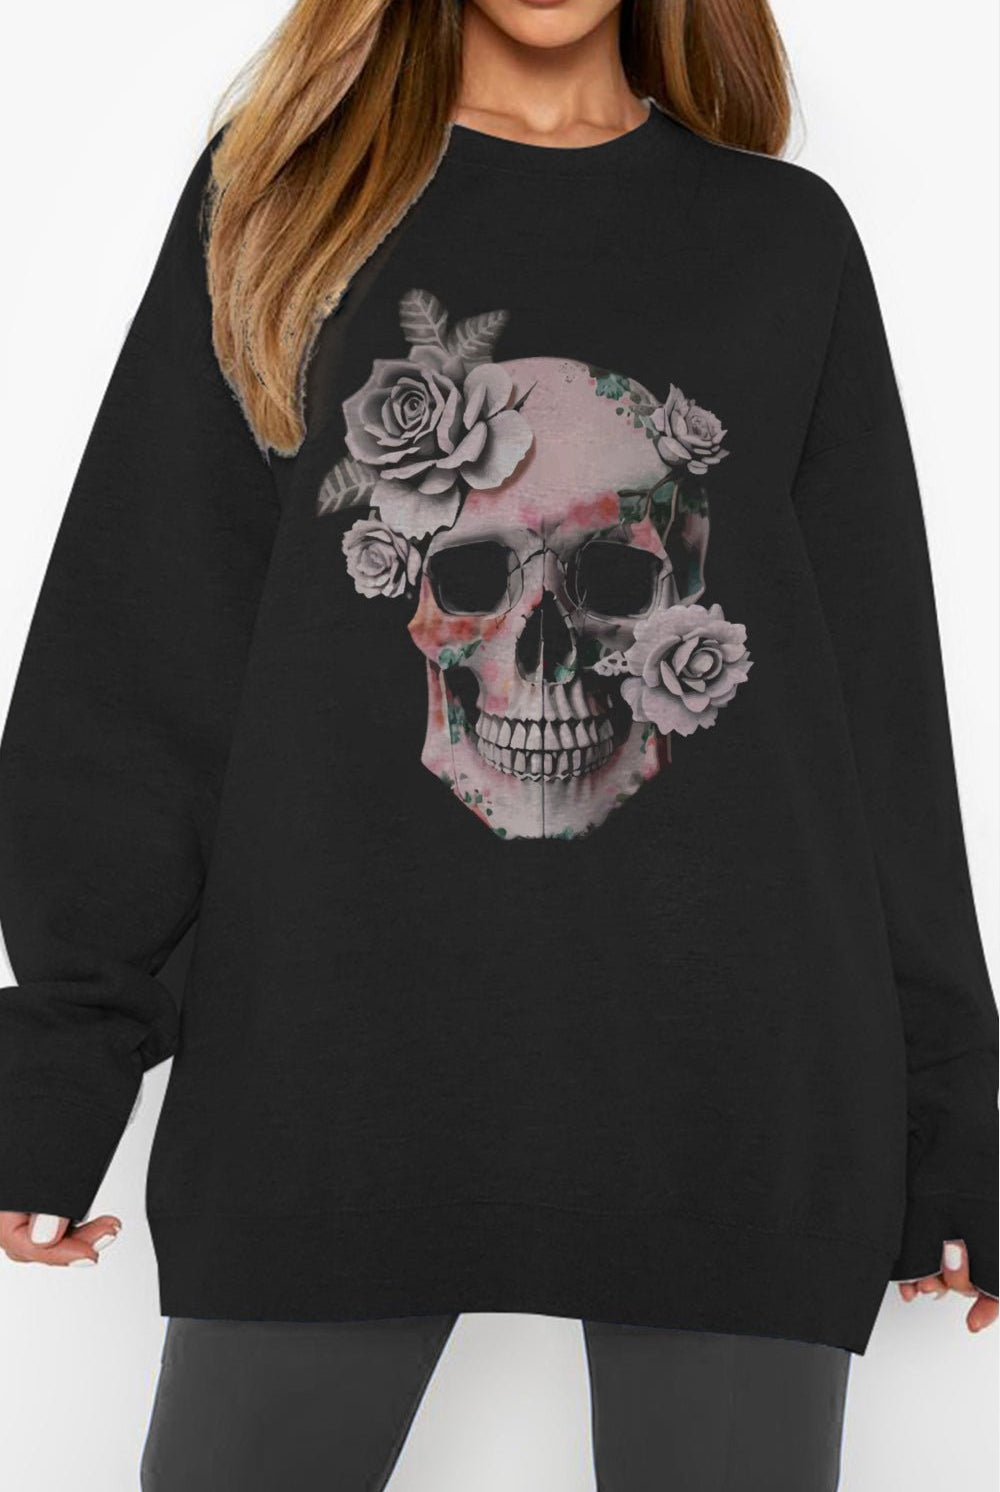 Simply Love Simply Love Full Size Dropped Shoulder SKULL Graphic Sweatshirt - GemThreads Boutique